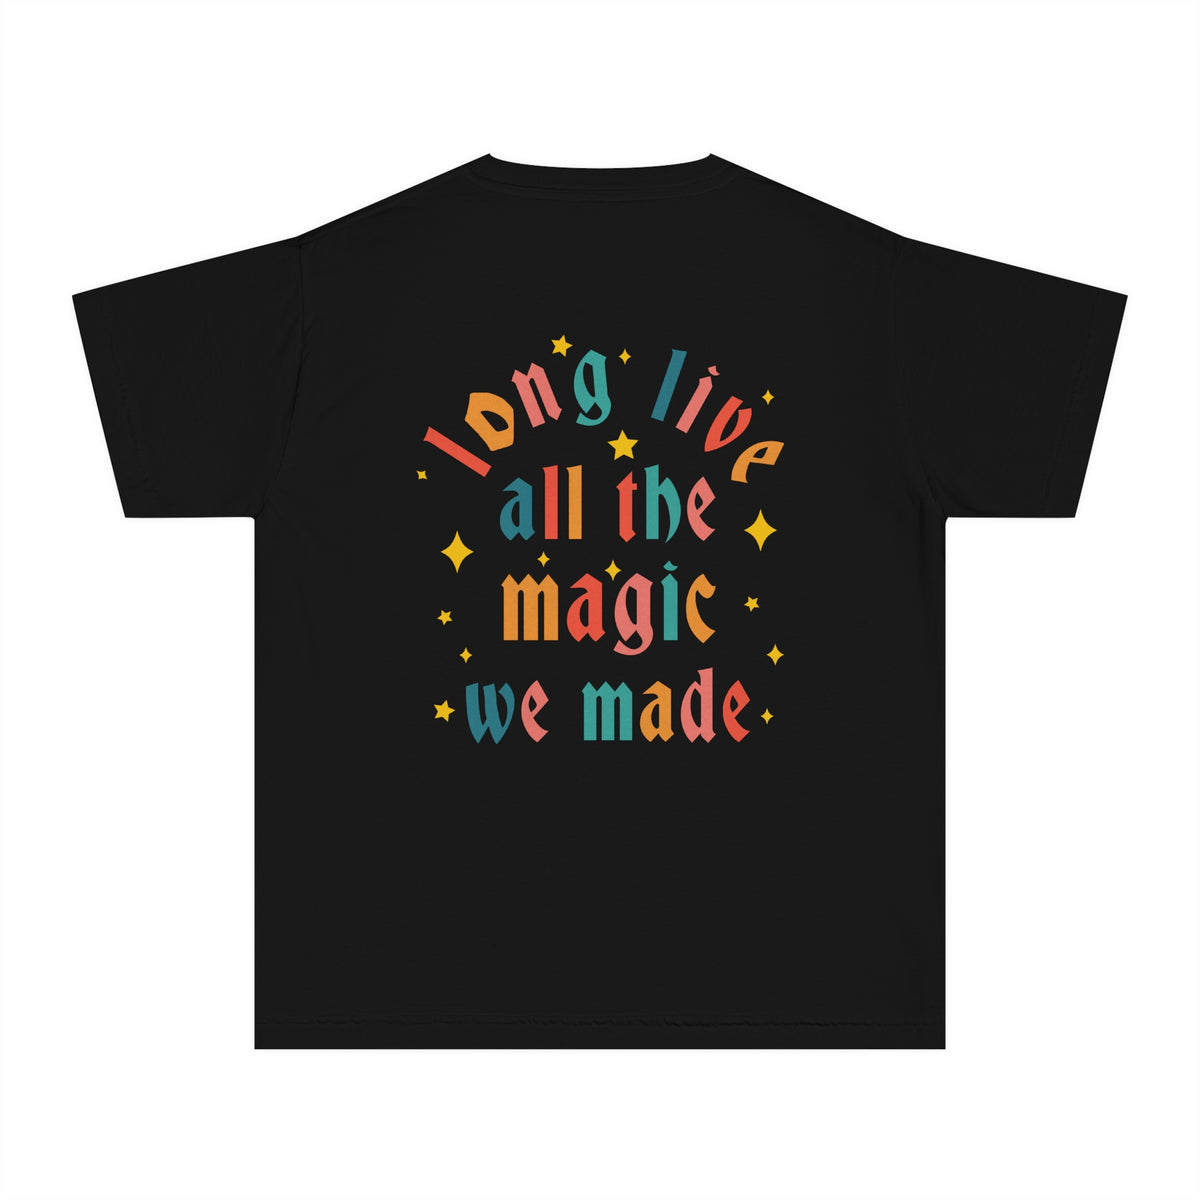 Long Live All The Magic We Made Comfort Colors Youth Midweight Tee